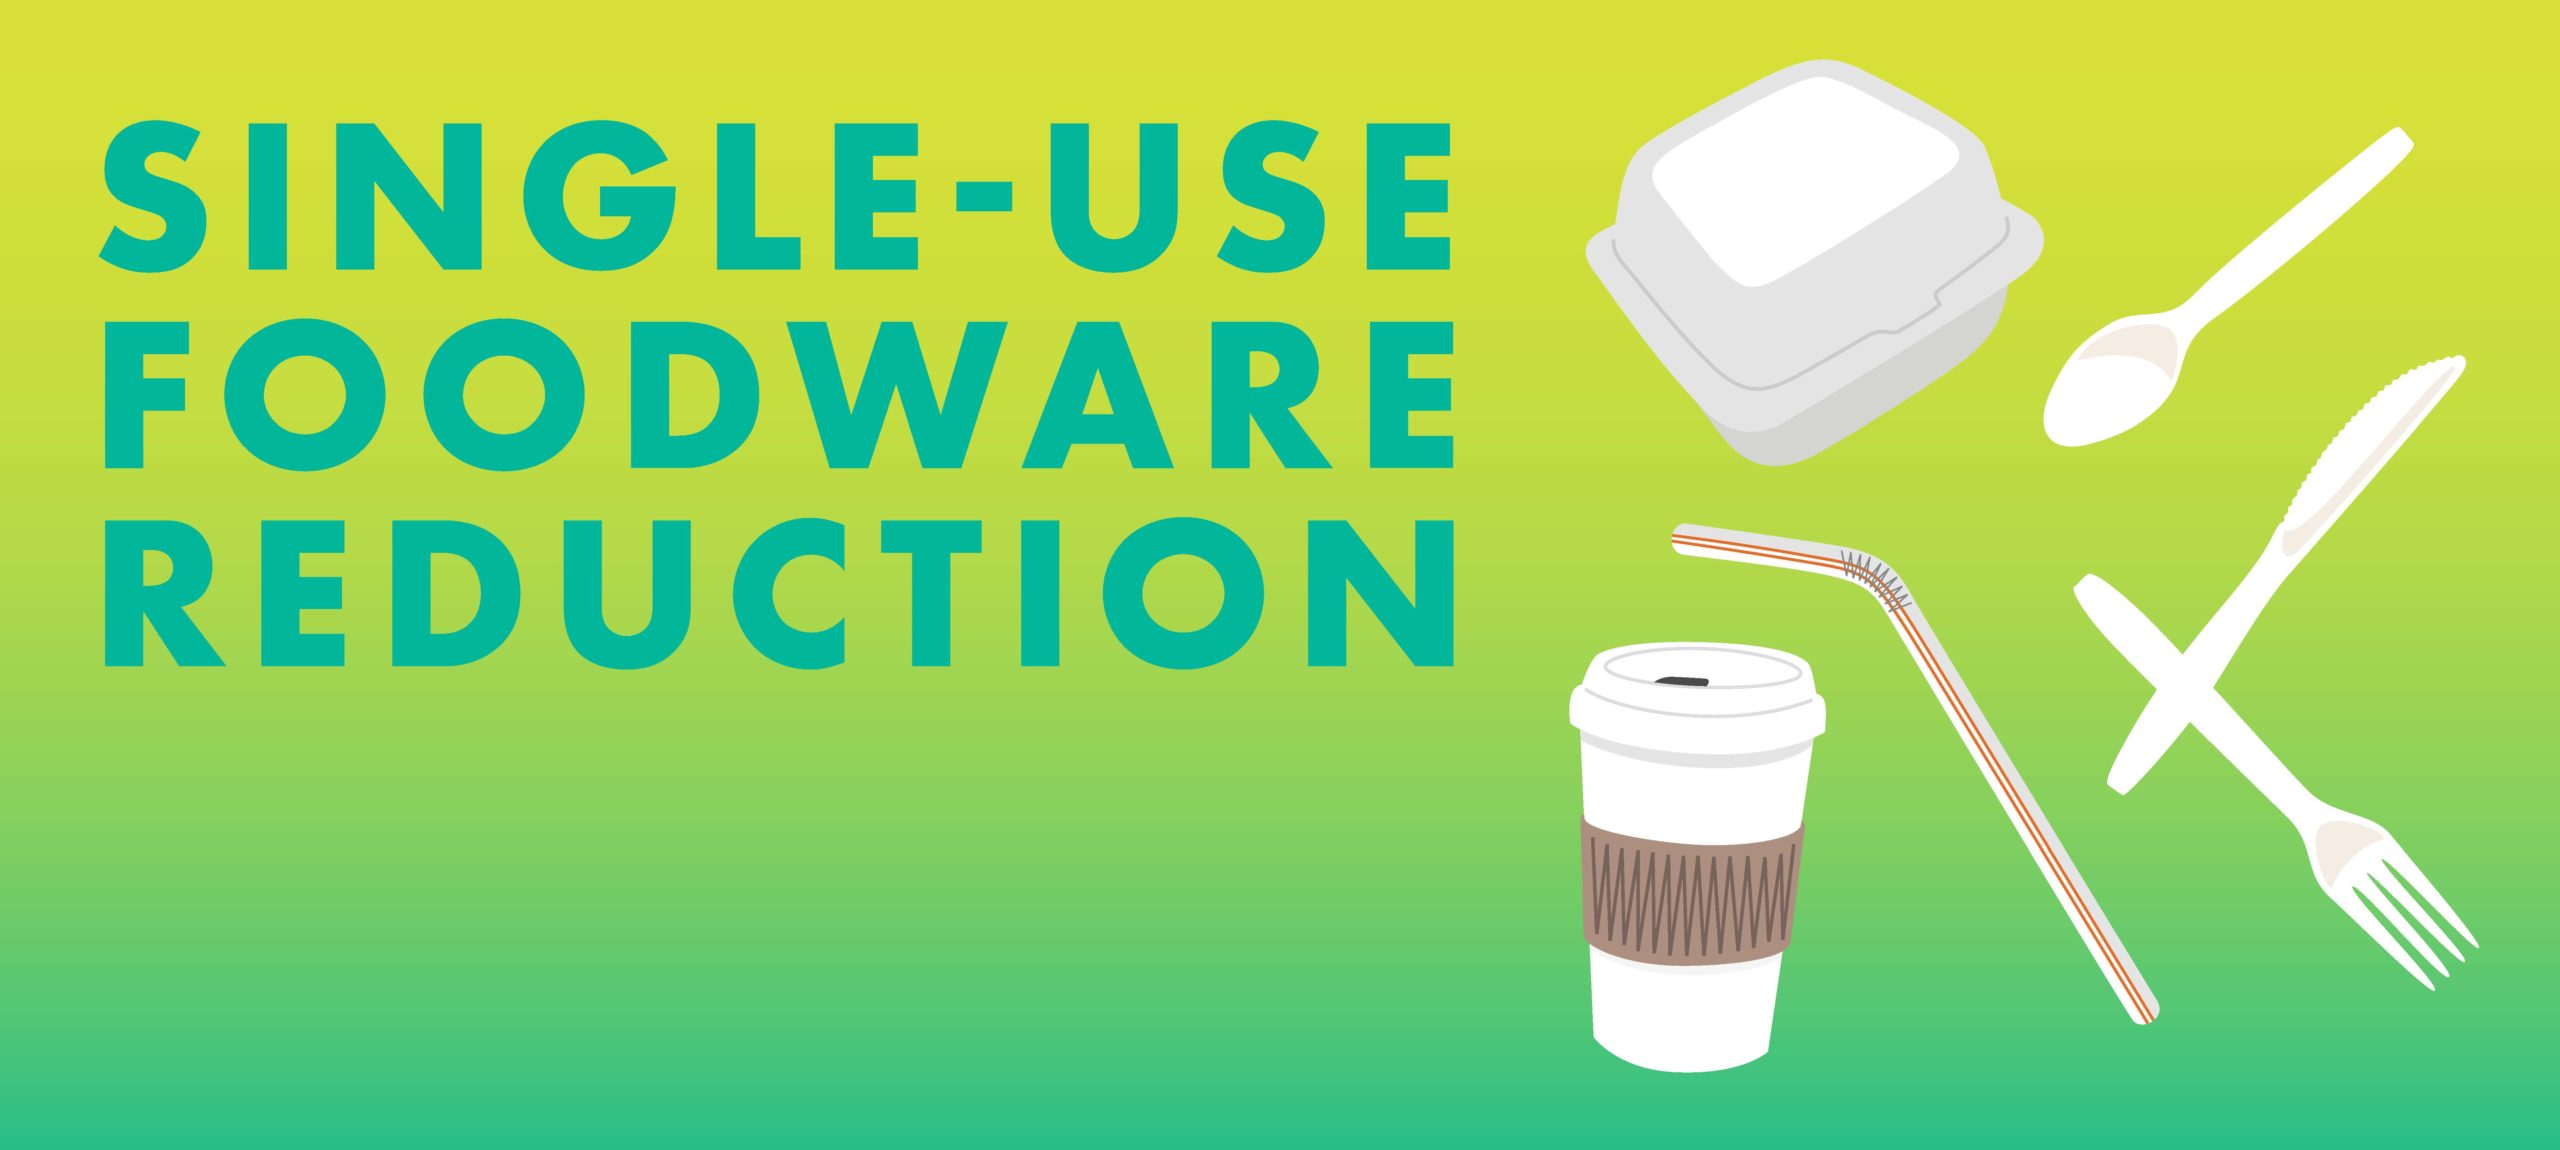 Learn about the ordinance in process to reduce single-use foodware image